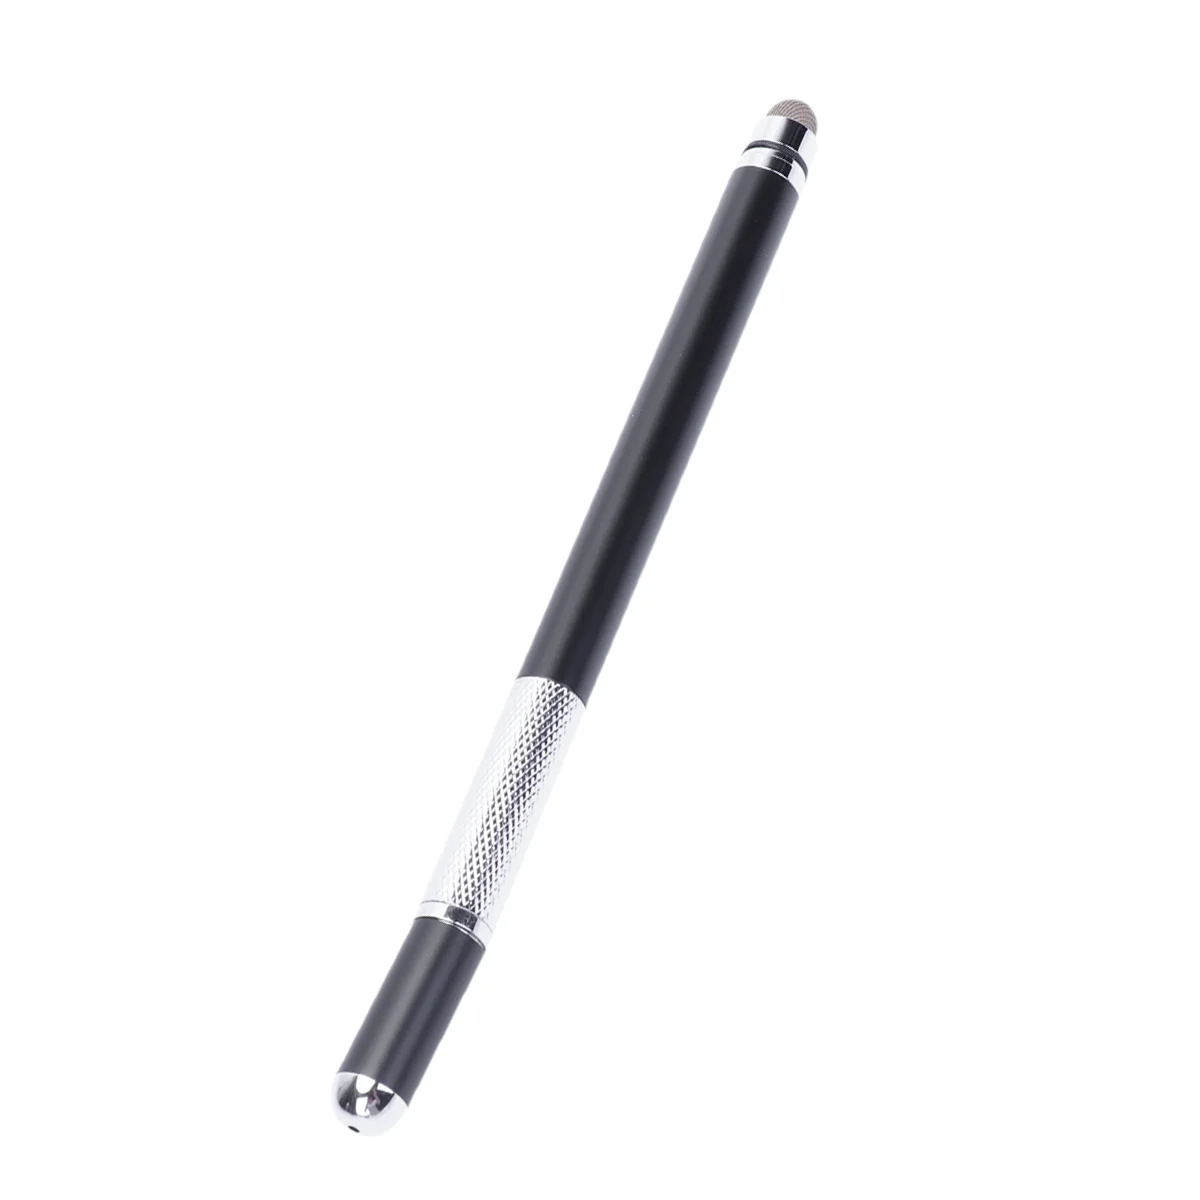 

Universal Double End Capacitive Metal Stylus Pen Metal Touch Screen Disc Phones Pens for Tablets Handwriting Laptops (Black)